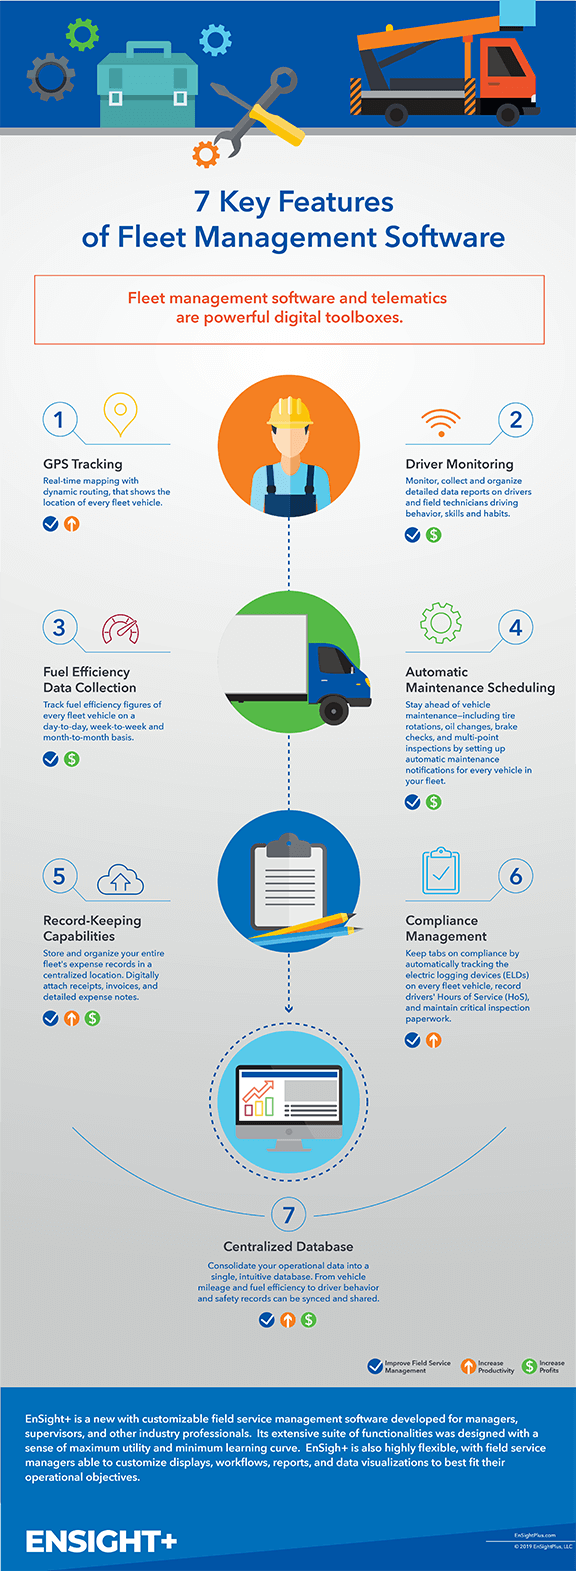 EnSightPlus Infographic 7 Key Features FMS